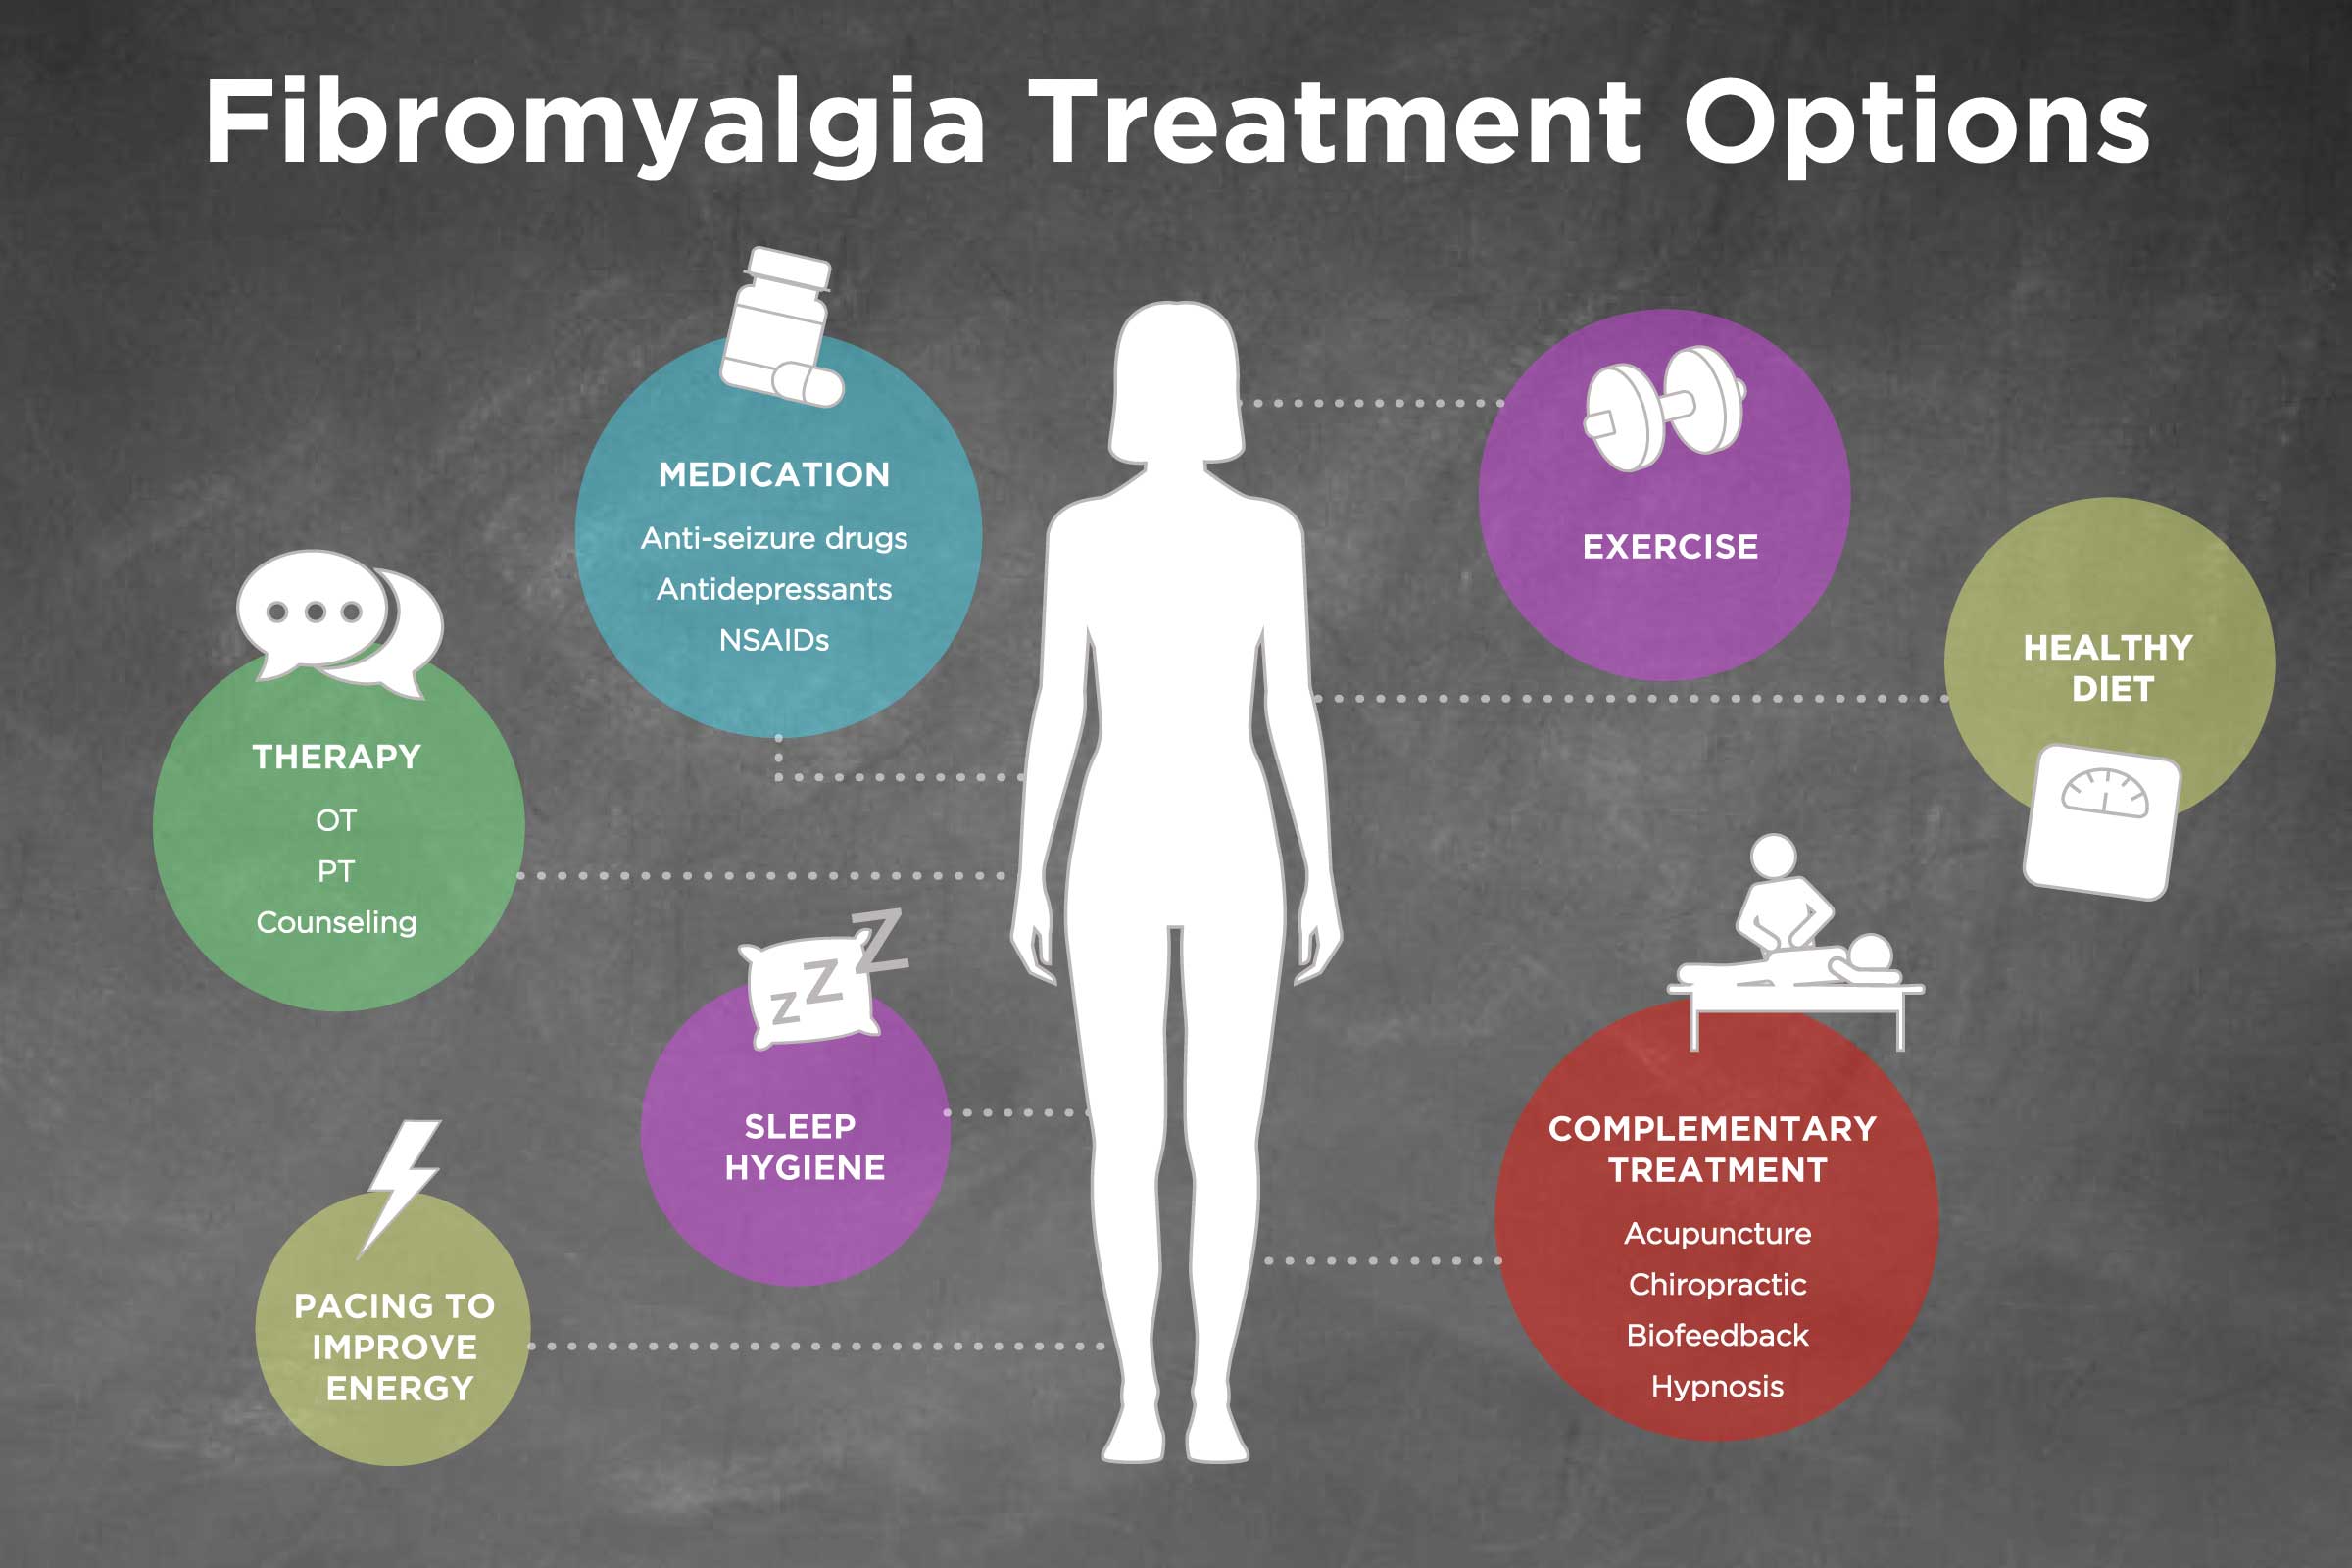 9 tips for anyone newly diagnosed with fibromyalgia